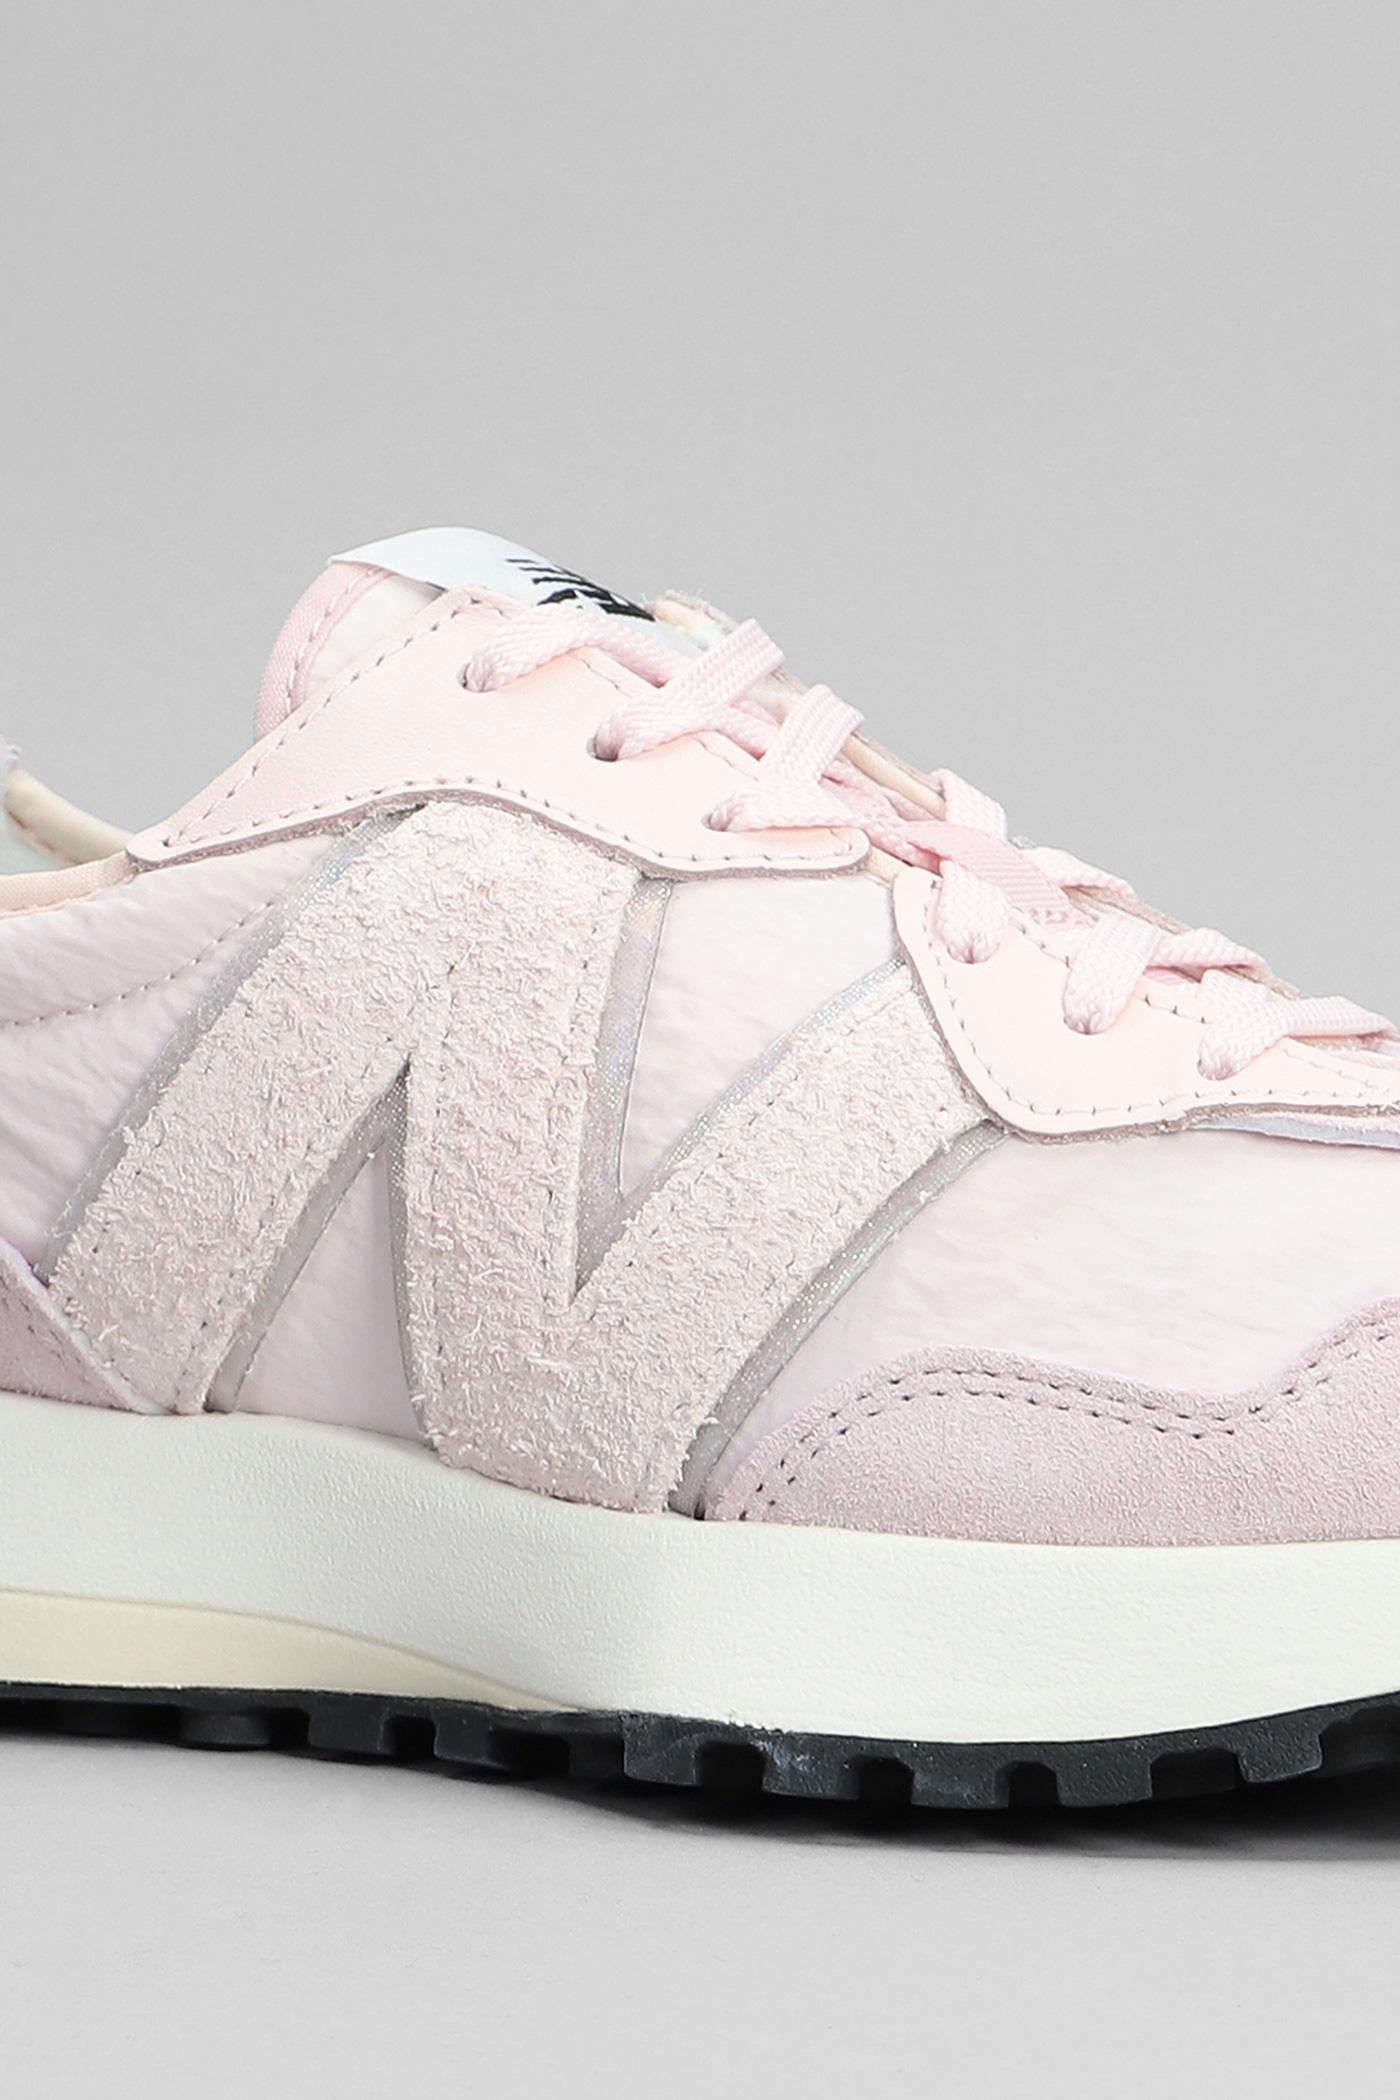 New Balance 327 Sneakers In Rose-pink Suede And Fabric | Lyst